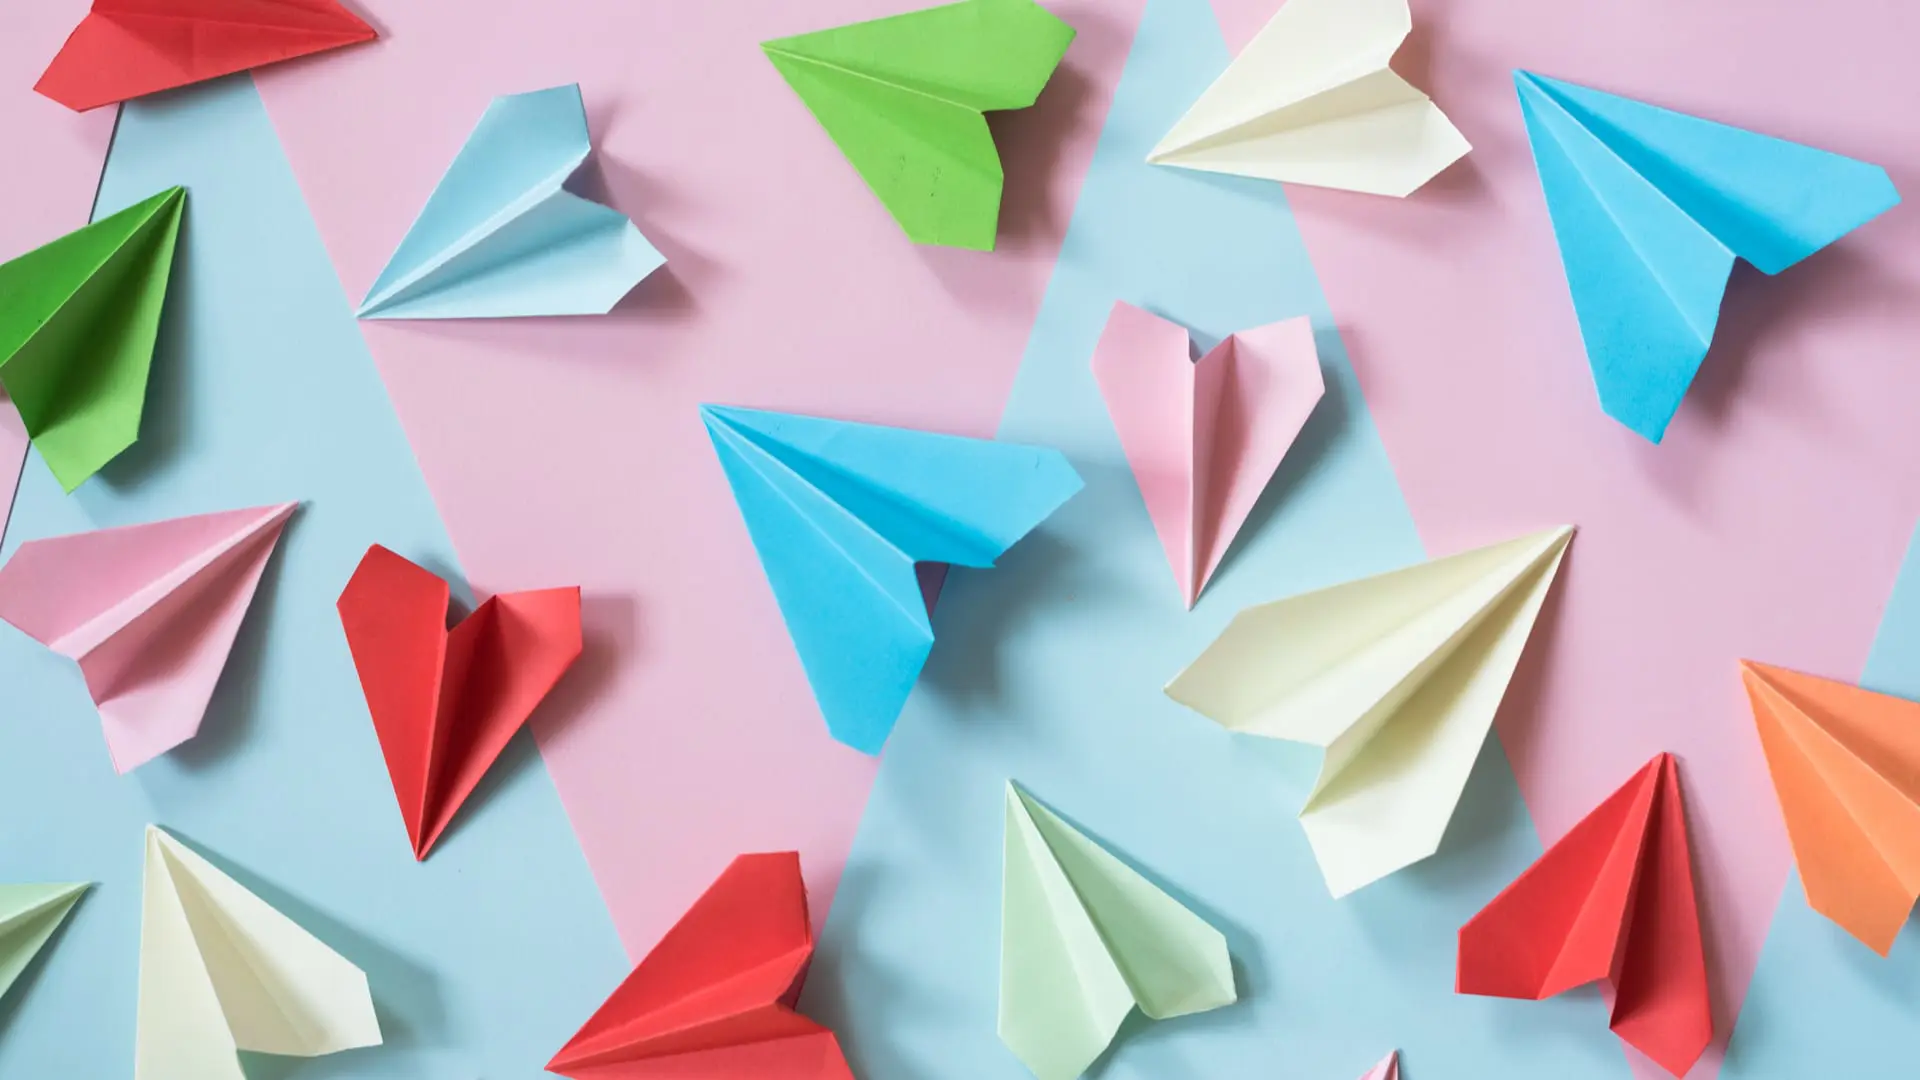 multicolored paper airplane layed out on pink and blue paper